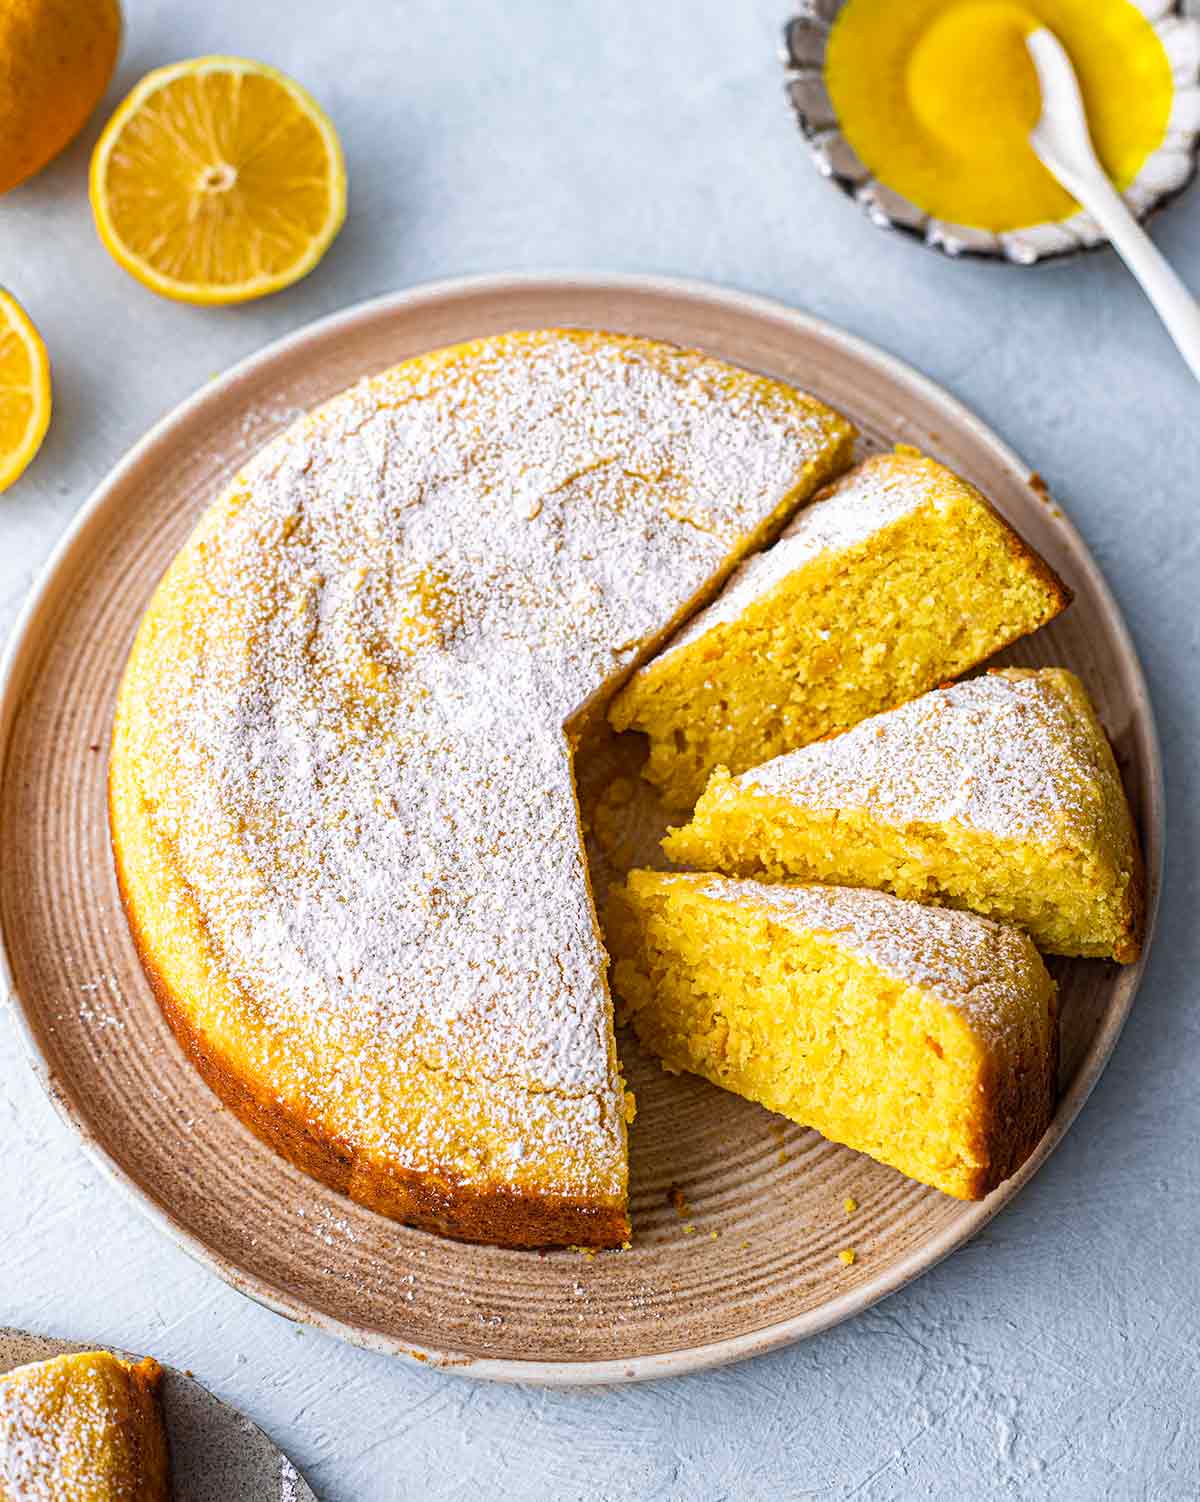 Whole vegan lemon cake on plate with slices coming out revealing bright yellow hue.